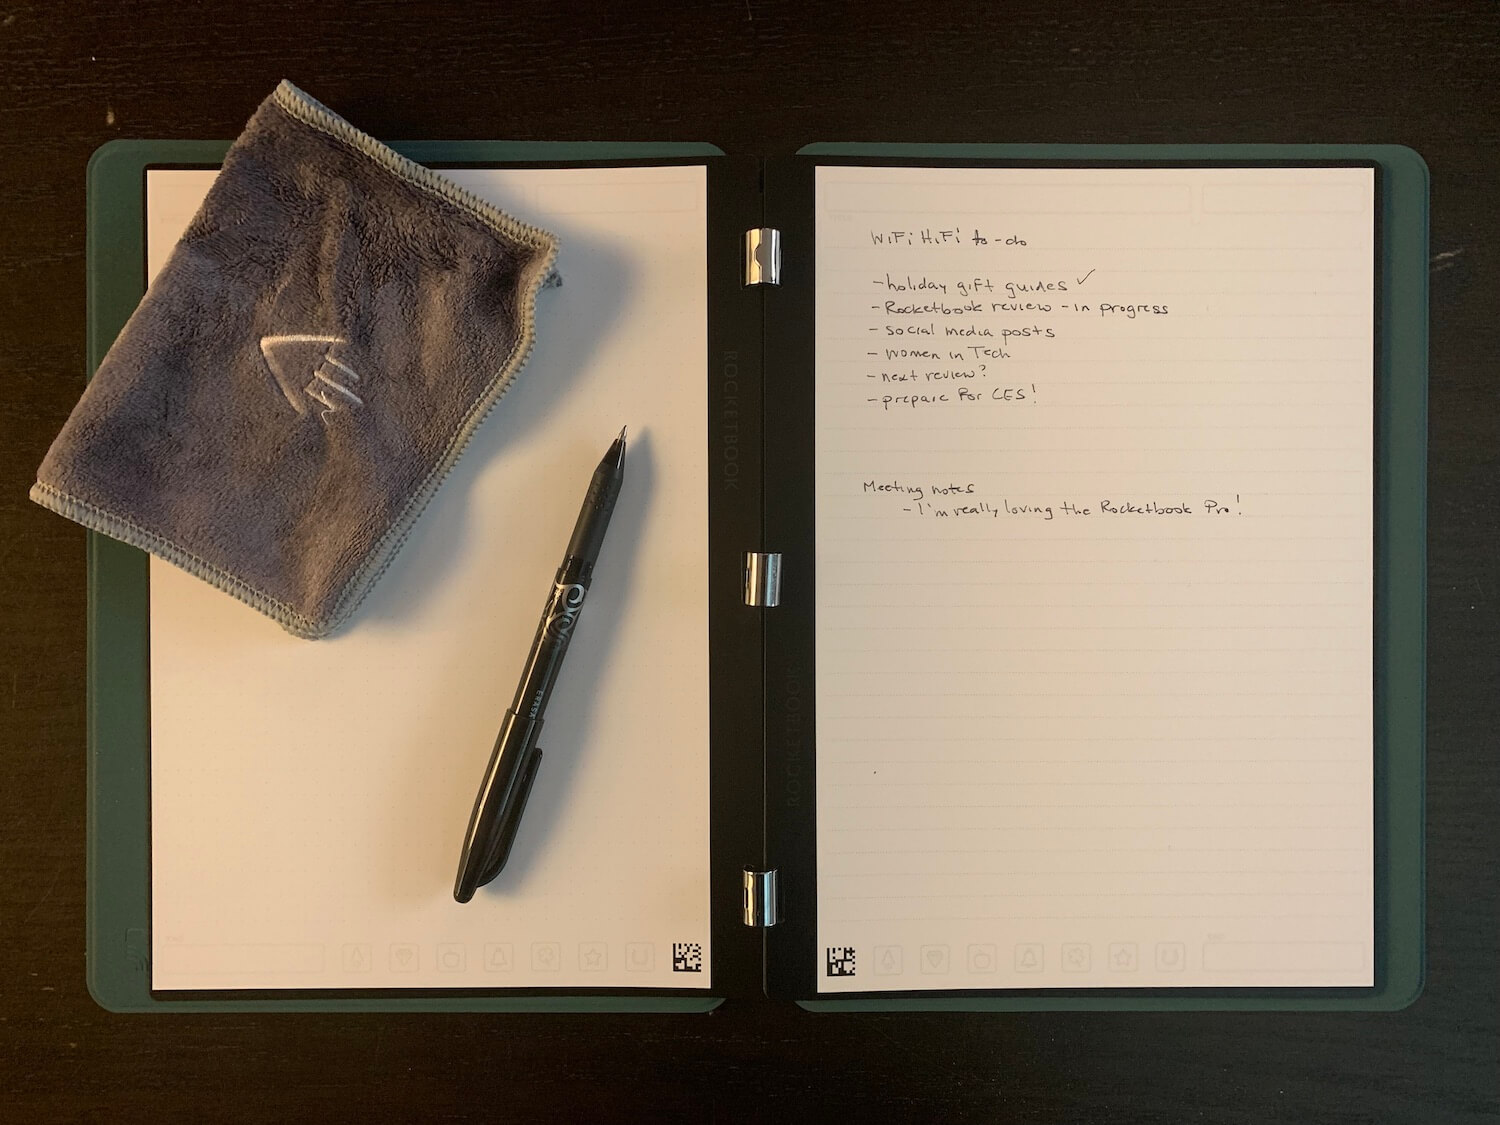 Rocketbook Pro with pen and cloth